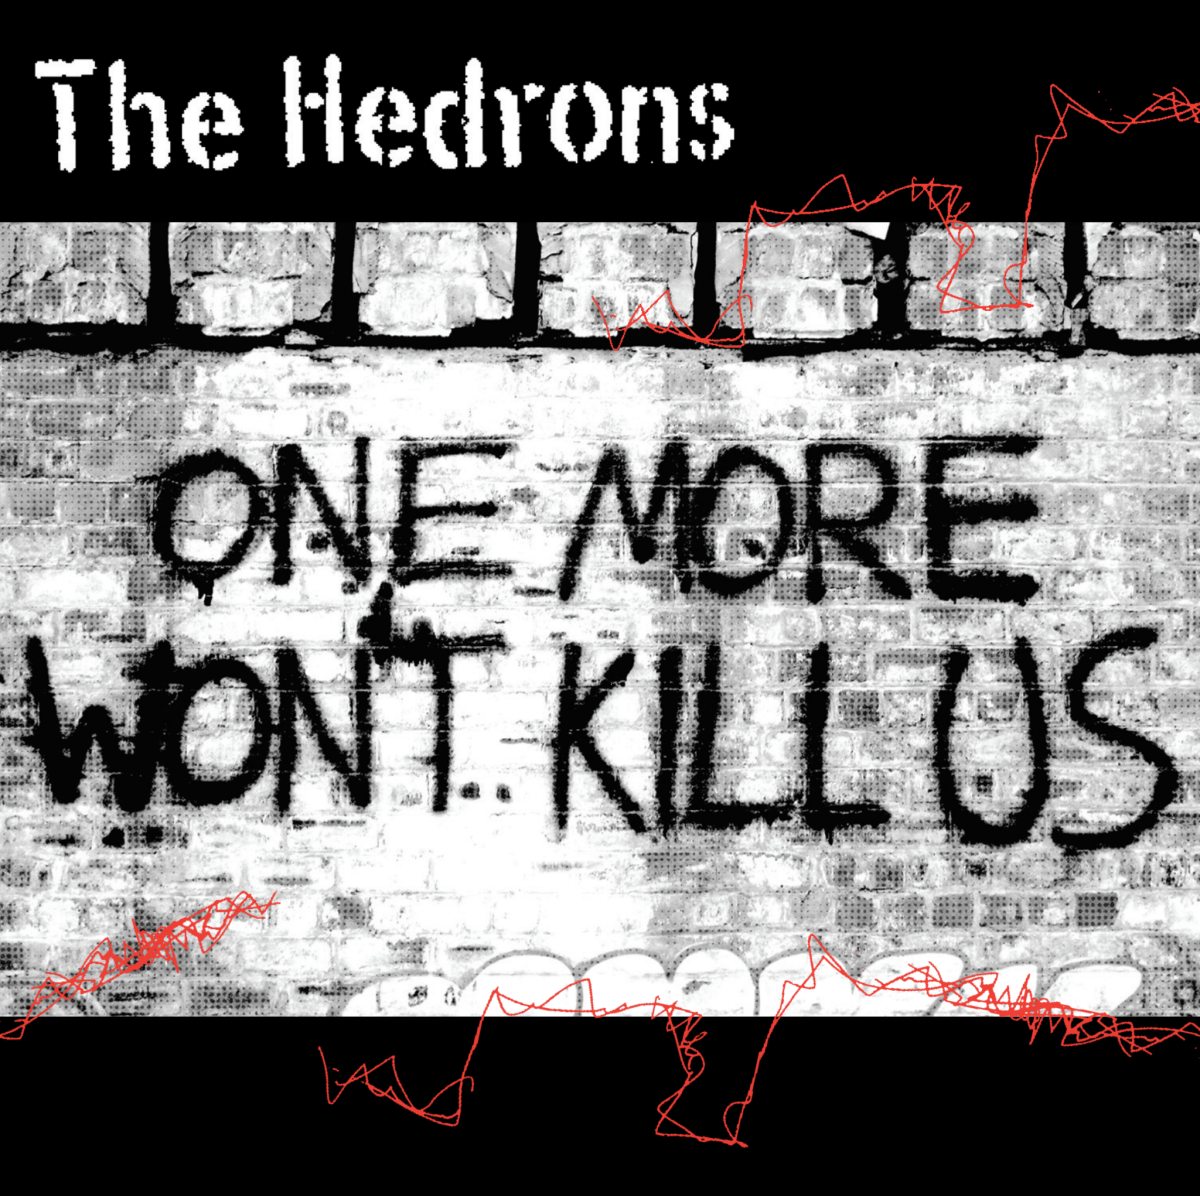 The Hedrons -- One More Won't Kill Us album cover art